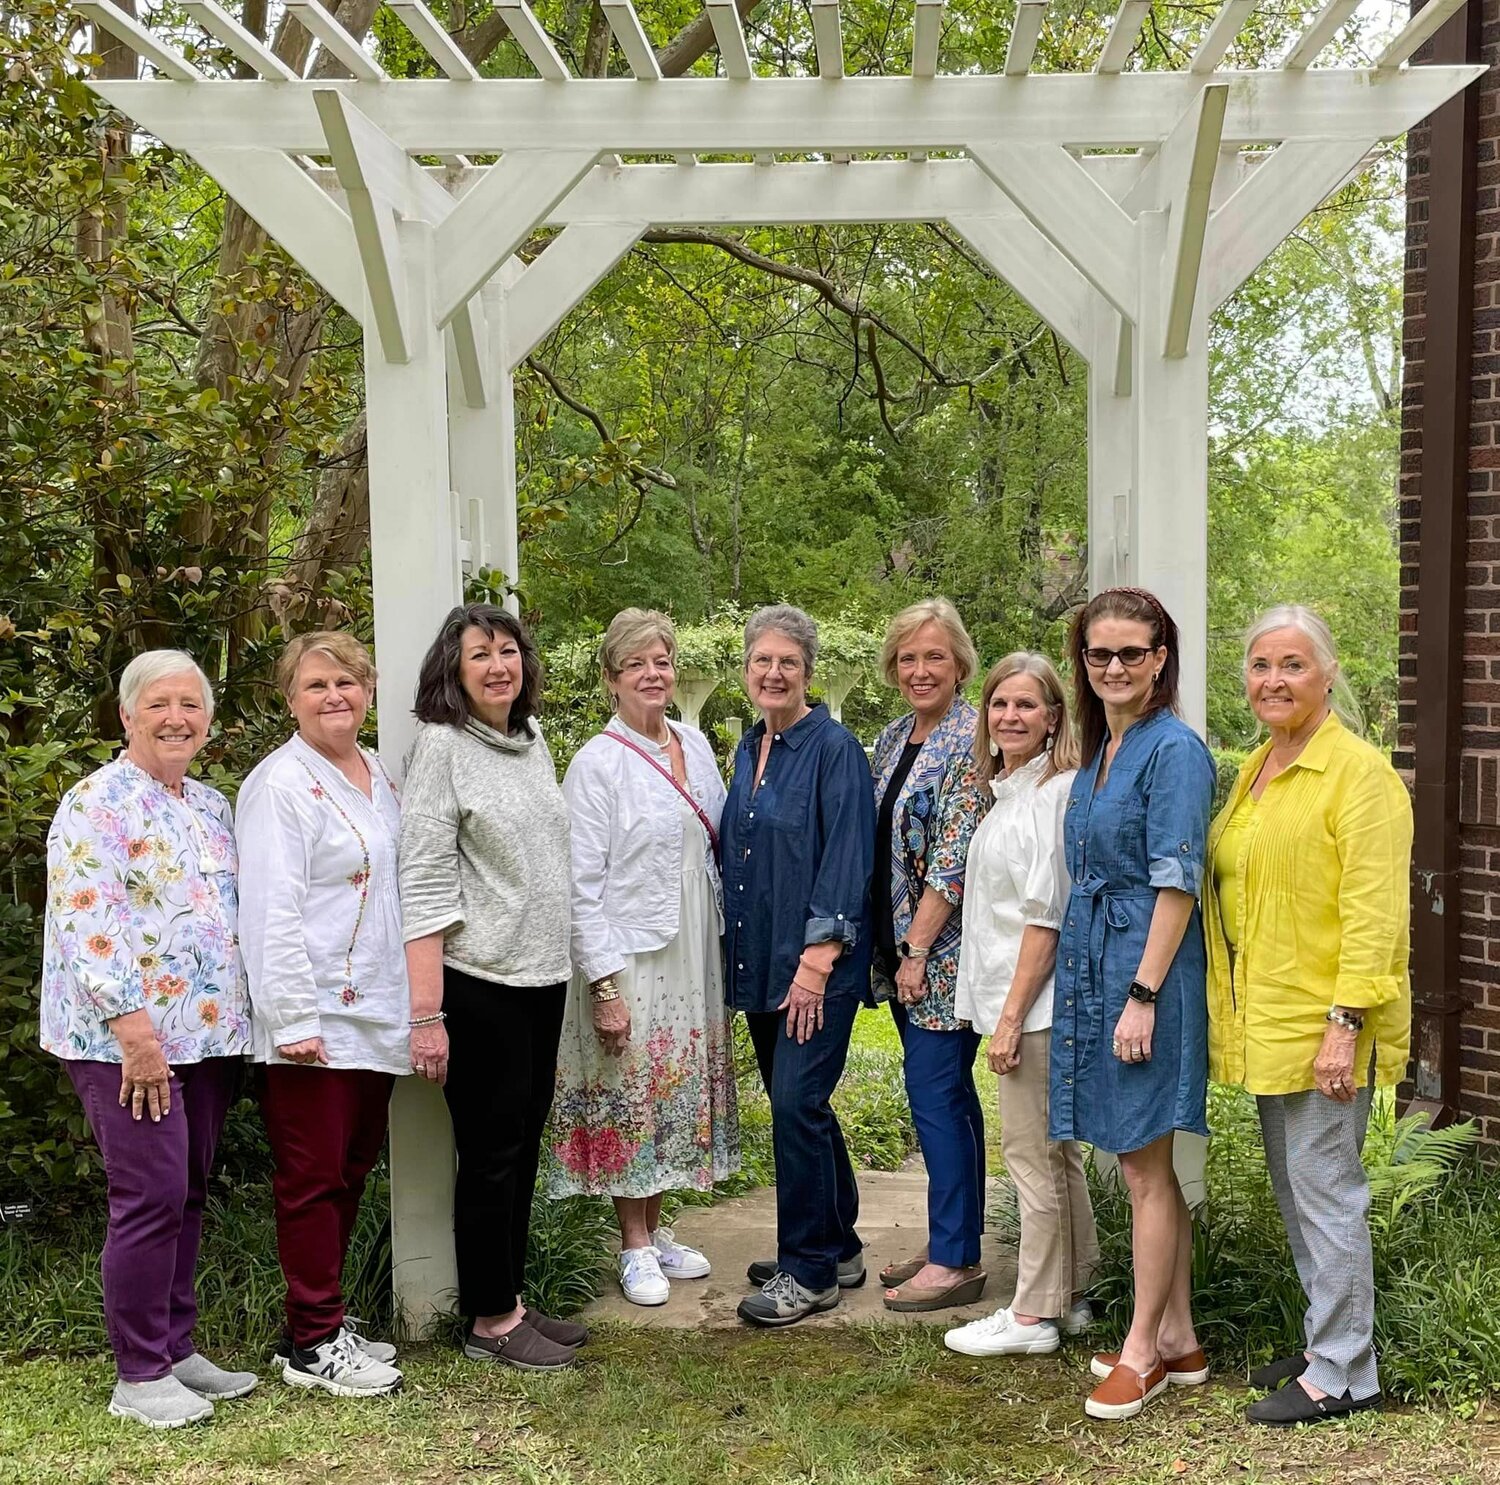 Pictured, from left, are Mary Manning, Beth Herring, Suzanne Stephens, Margaret Collier, Myra Cook Chapter Regent, Liz Covington, Debbie Cannon, Amy Michaud, and Bette Poole.